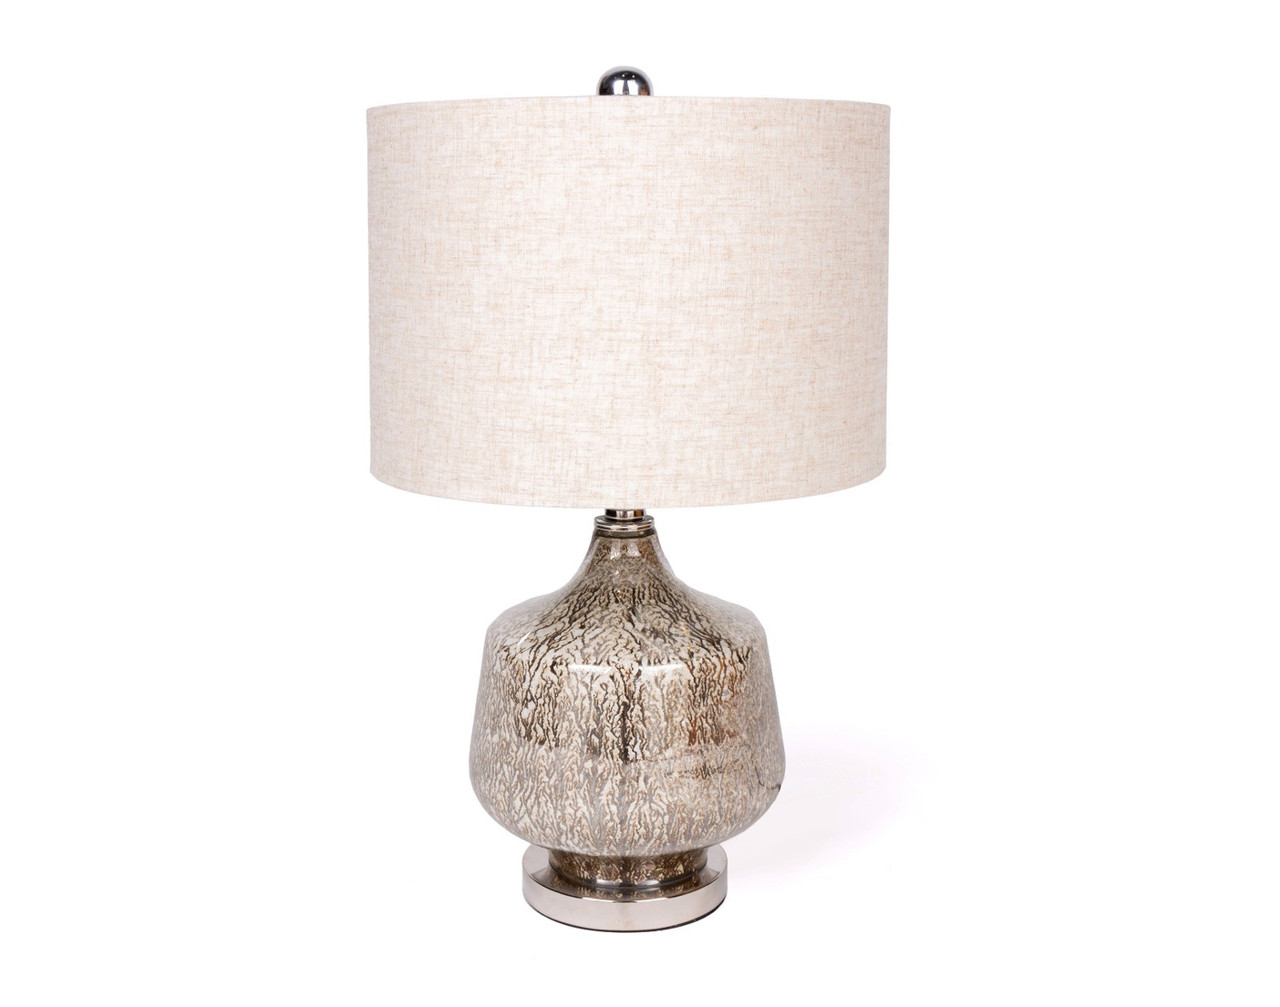 Front view of our Kinsley Glass Table Lamp resting against a solid white background with the light turned off.